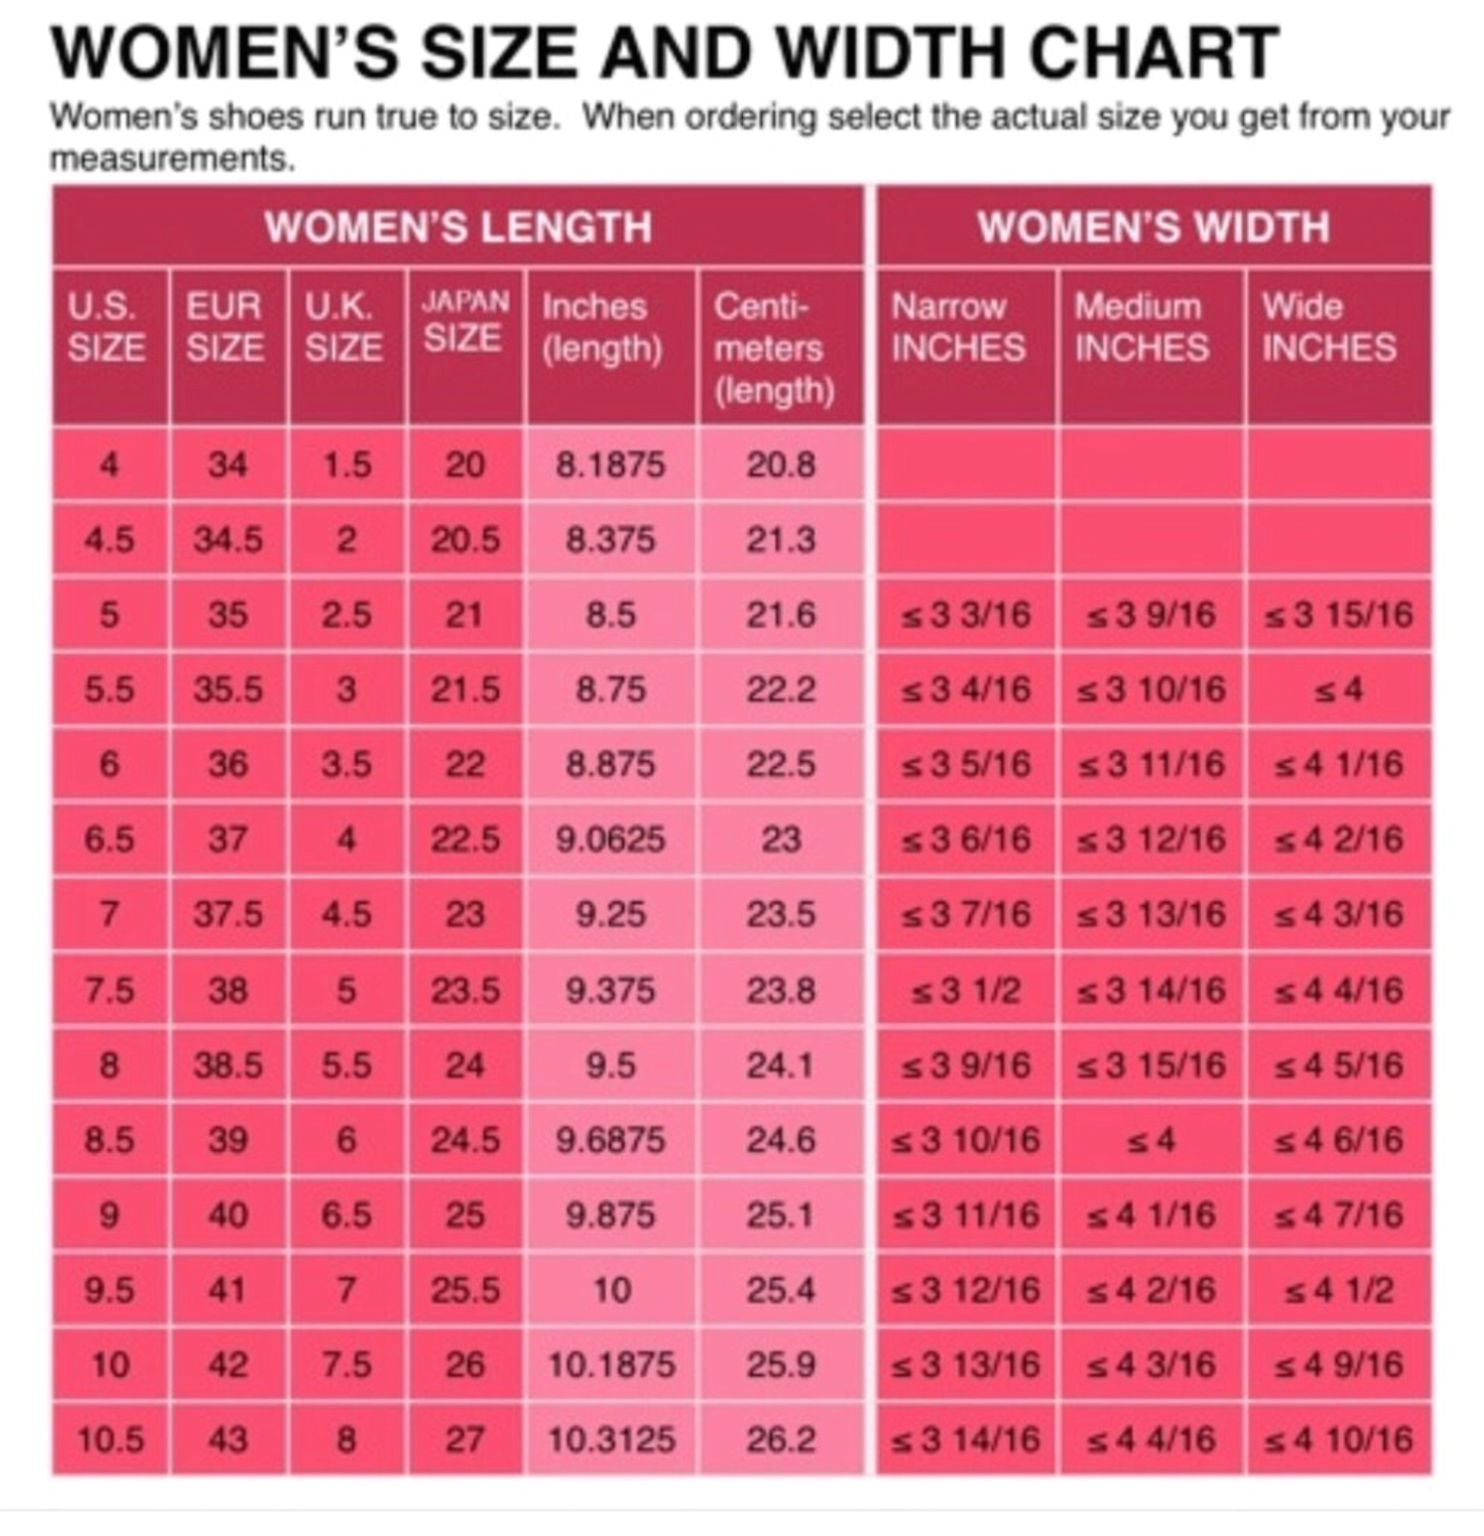 Women size and width chart